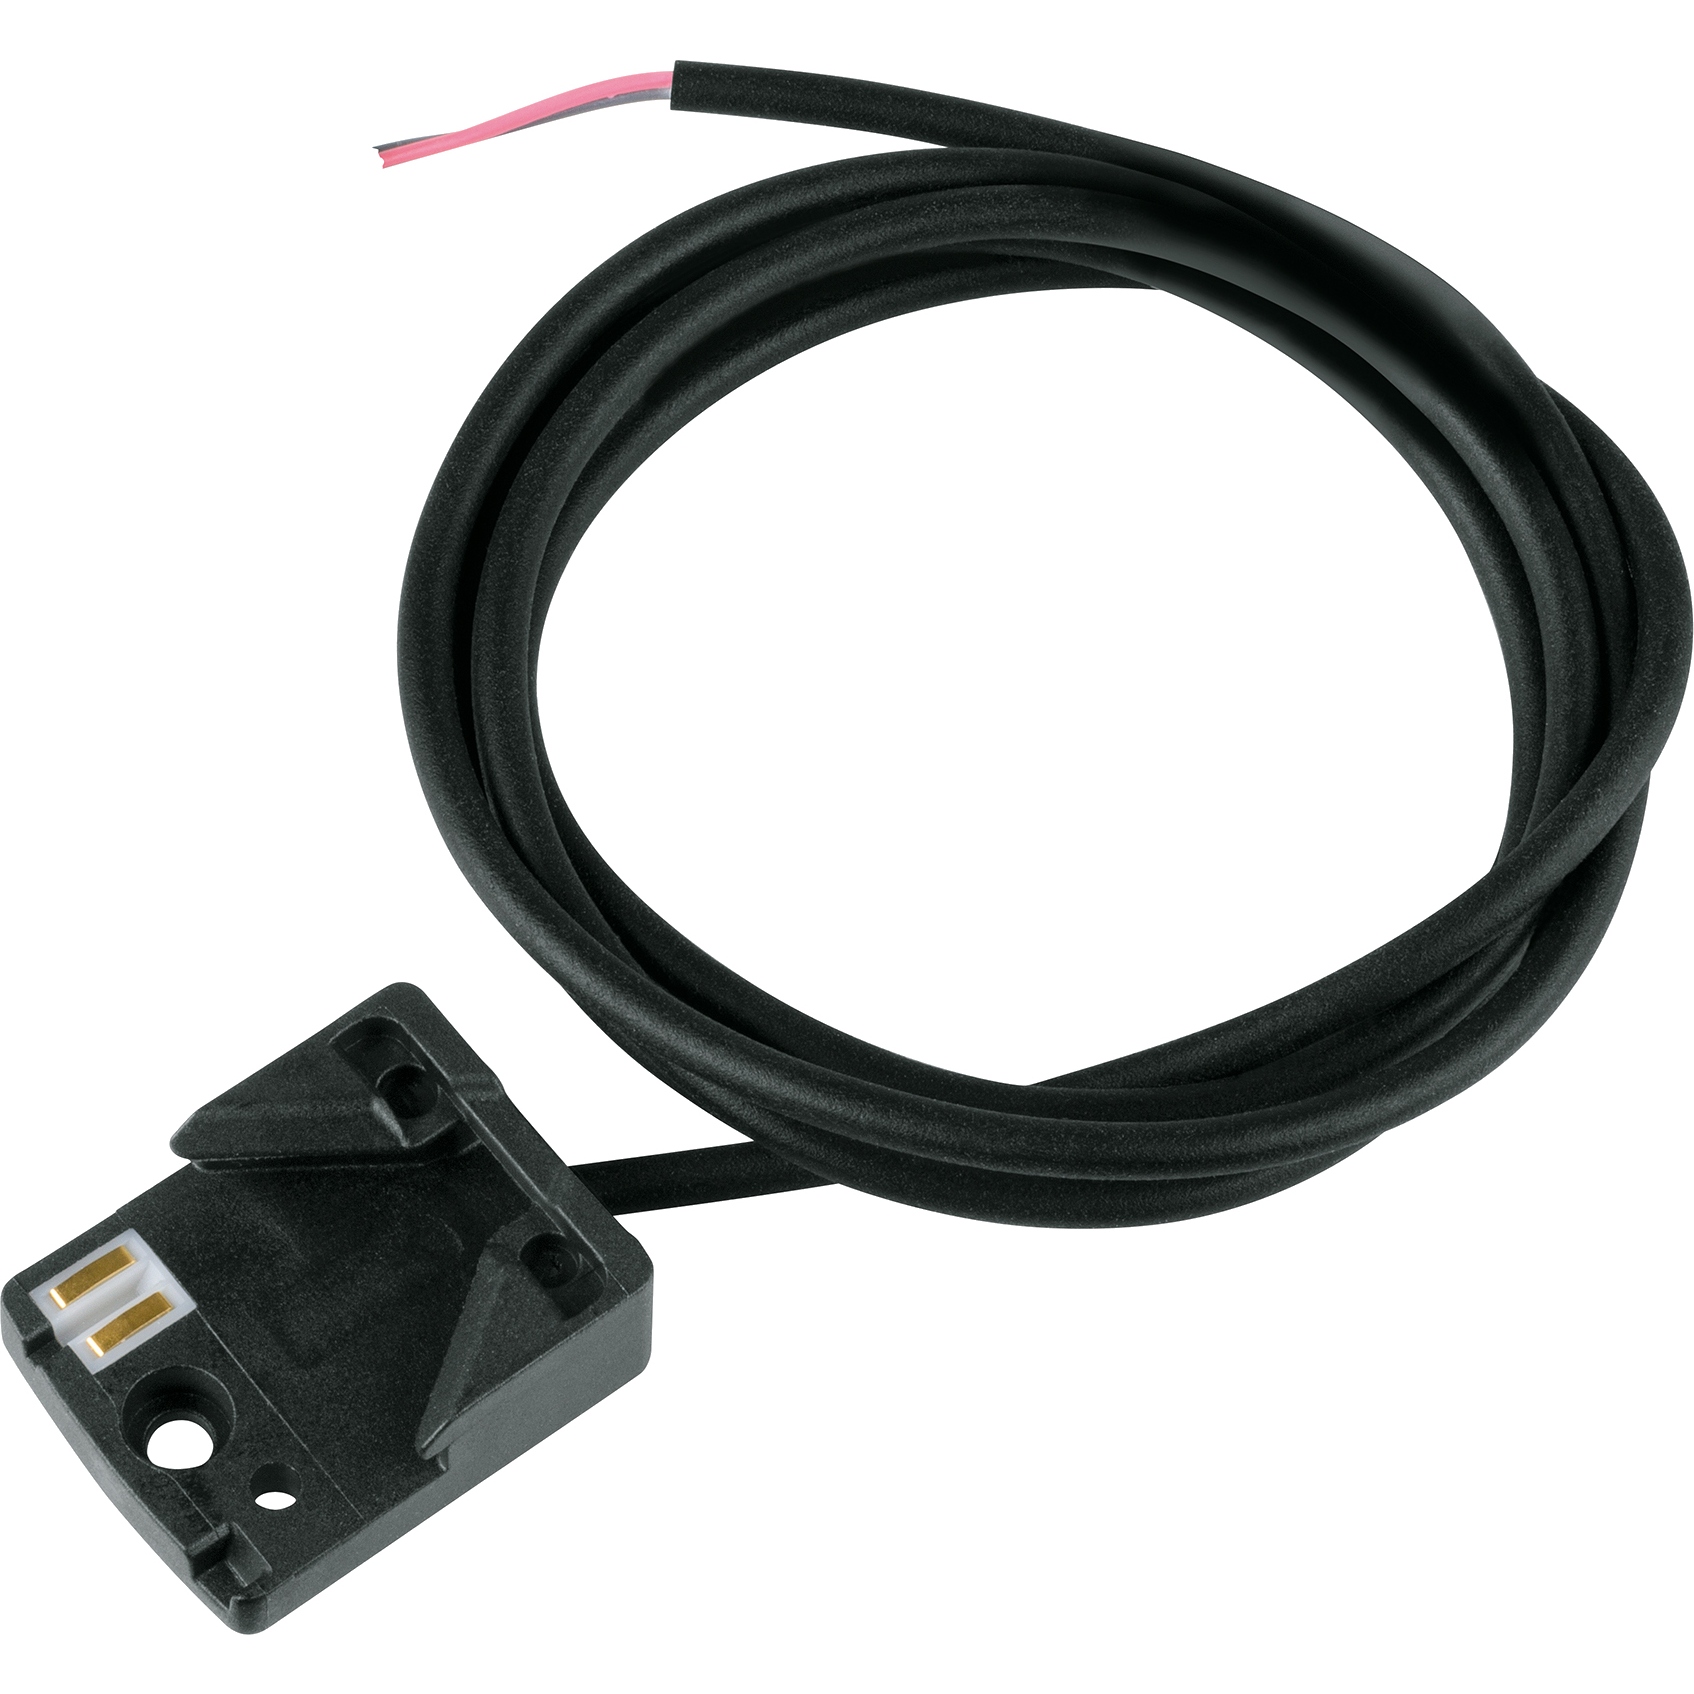 Picture of MonkeyLink Interface Connect One4All REAR 800mm - Cable for E-Bike Rear Light